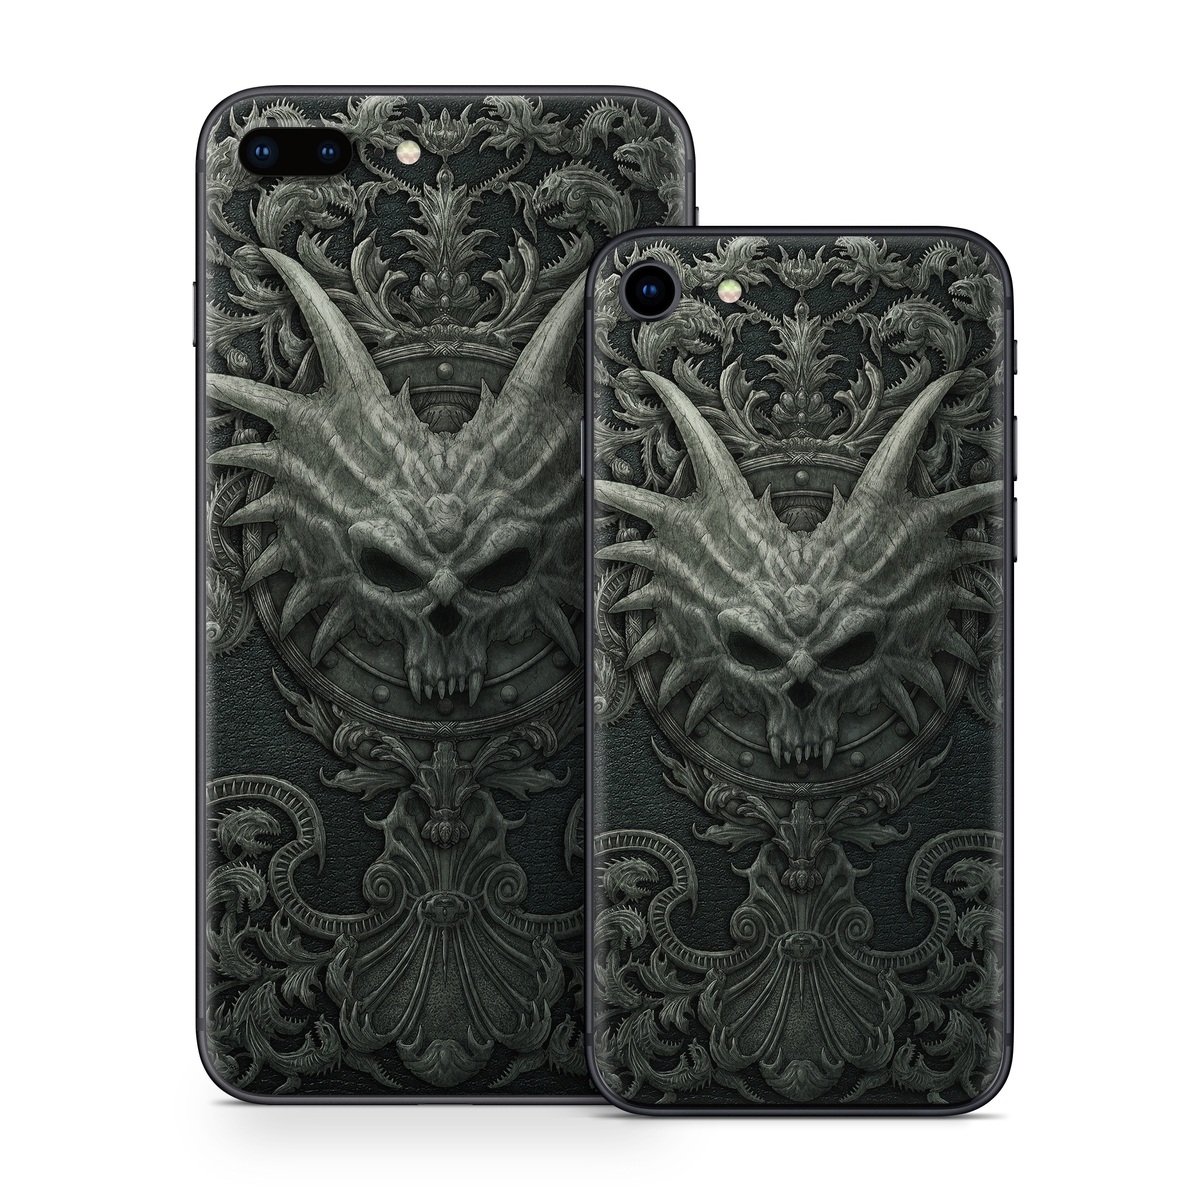  Skin design of Demon, Dragon, Fictional character, Illustration, Supernatural creature, Drawing, Symmetry, Art, Mythology, Mythical creature, with black, gray colors